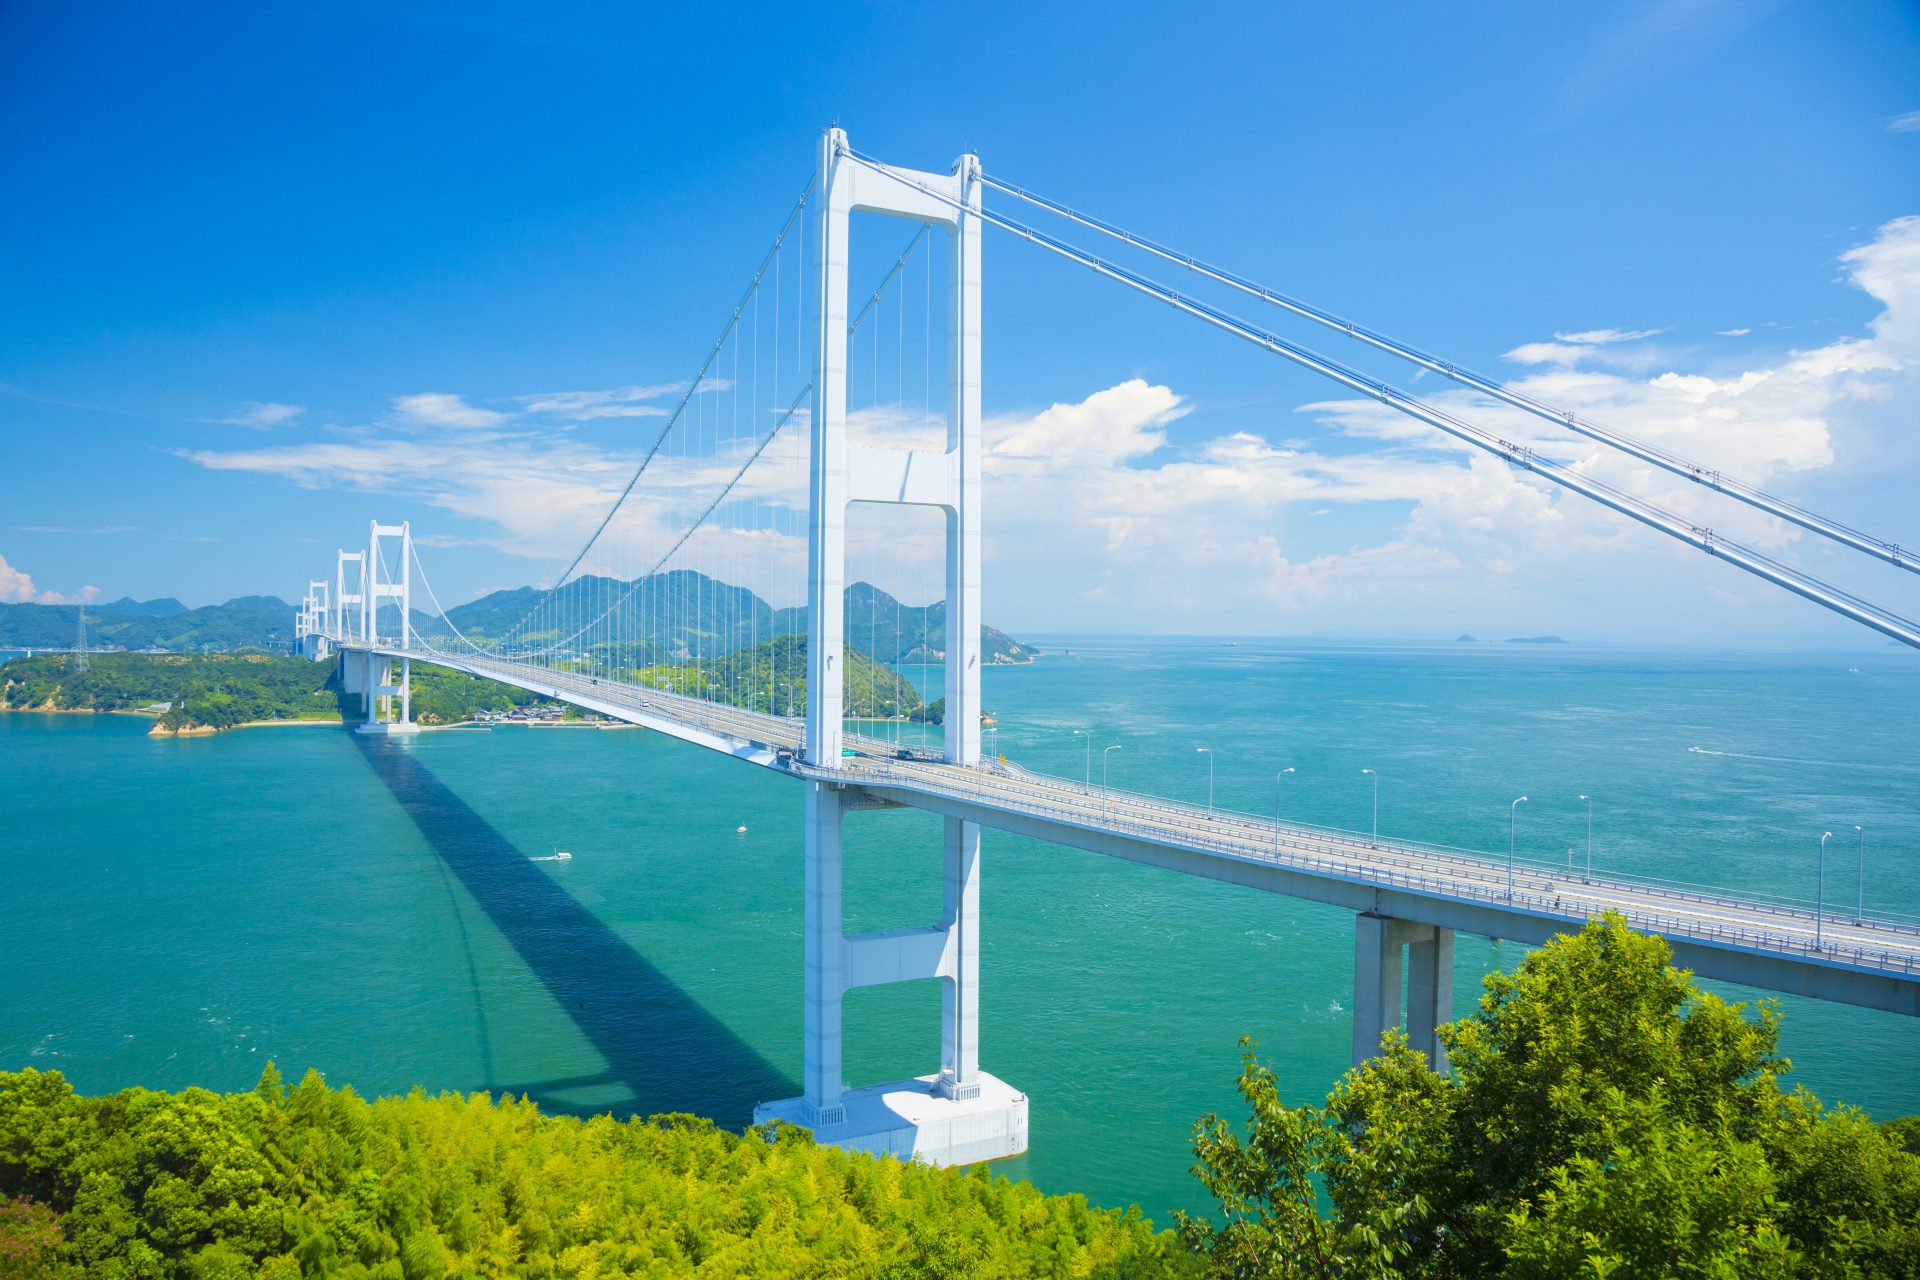 <p>This is the world's first triple-suspension bridge with a length of 4km (2.4 miles). In addition to the motorway, it also has a bicycle and pedestrian path where you can enjoy the beautiful scenery of the Seto Inland Sea from the top of the bridge. The best viewing point is the Itoyama Observation Deck.</p>